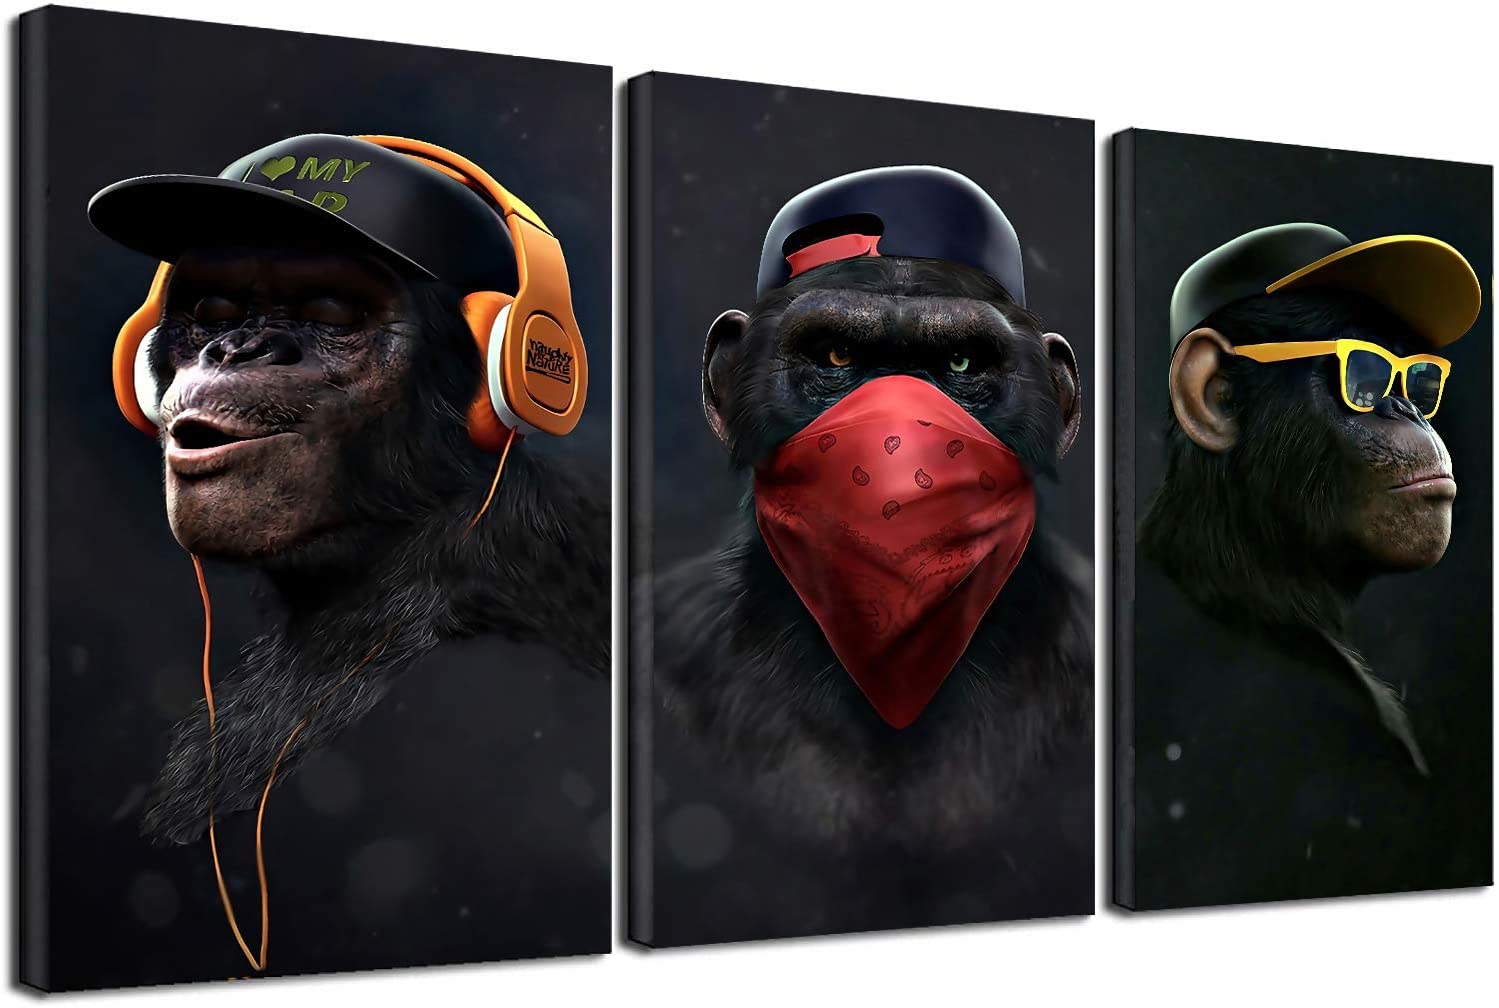 Buy Wise Monkeys Canvas Wall Art Picture, Funny Chimp Headphone Animal Canvas Prints for Living Room Modern Home Decor 3 Pcs (No Frame, 30x50cm(11.8x19.7)) Online in Taiwan. B08MPS1ZL8